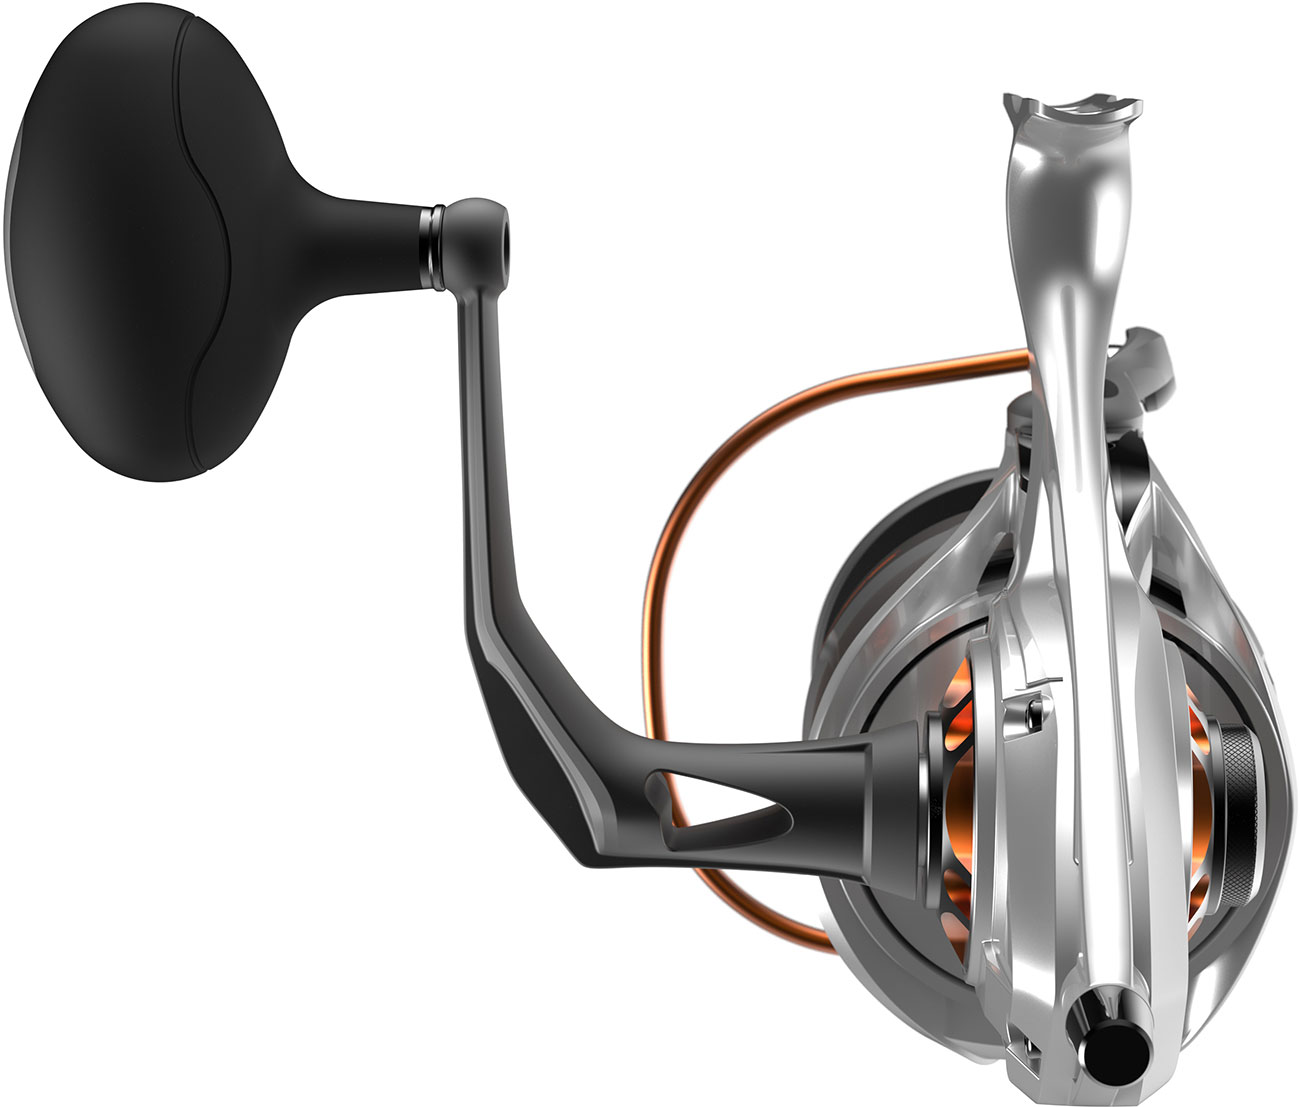 Quantum Reliance PT Spinning Reels - TackleDirect